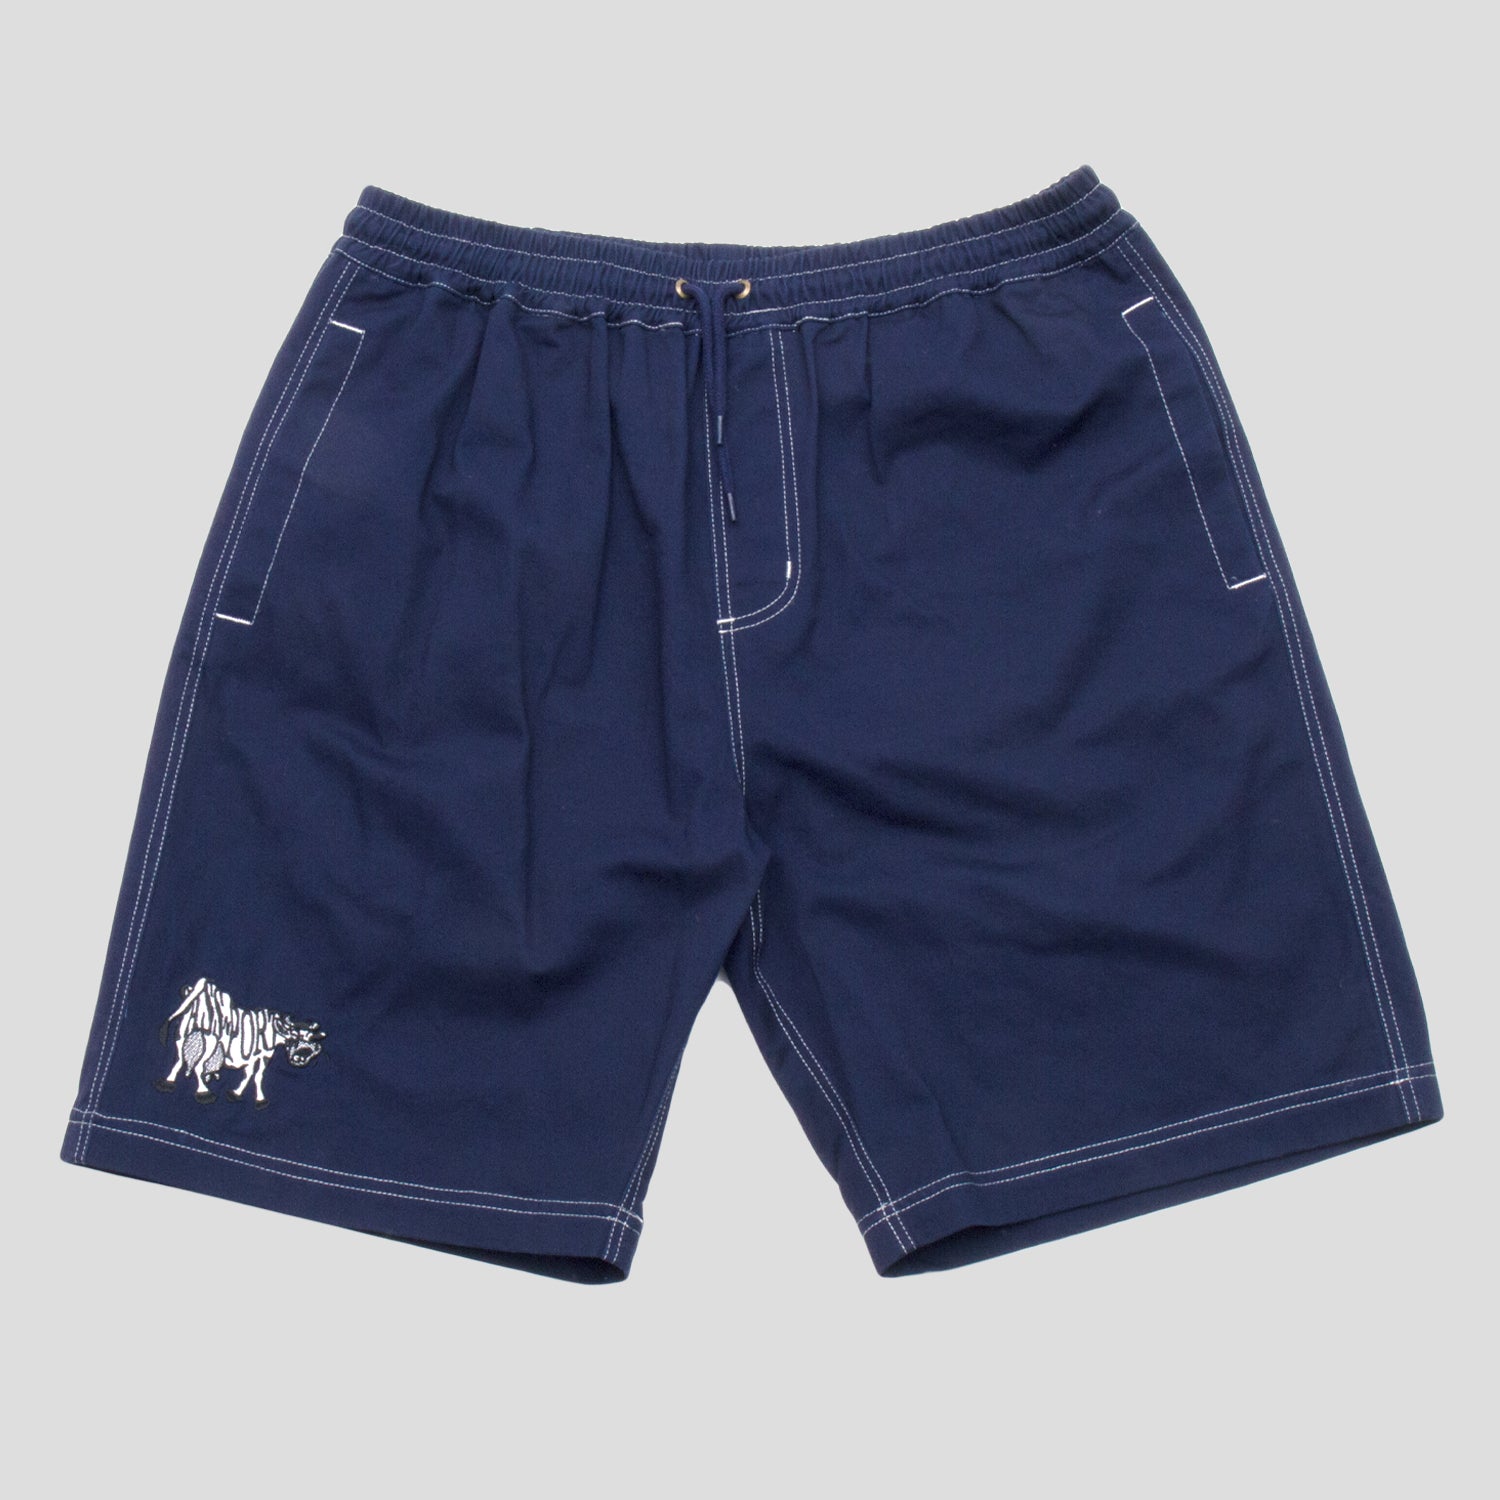 Pass~Port Crying Cow Casual Short - Navy